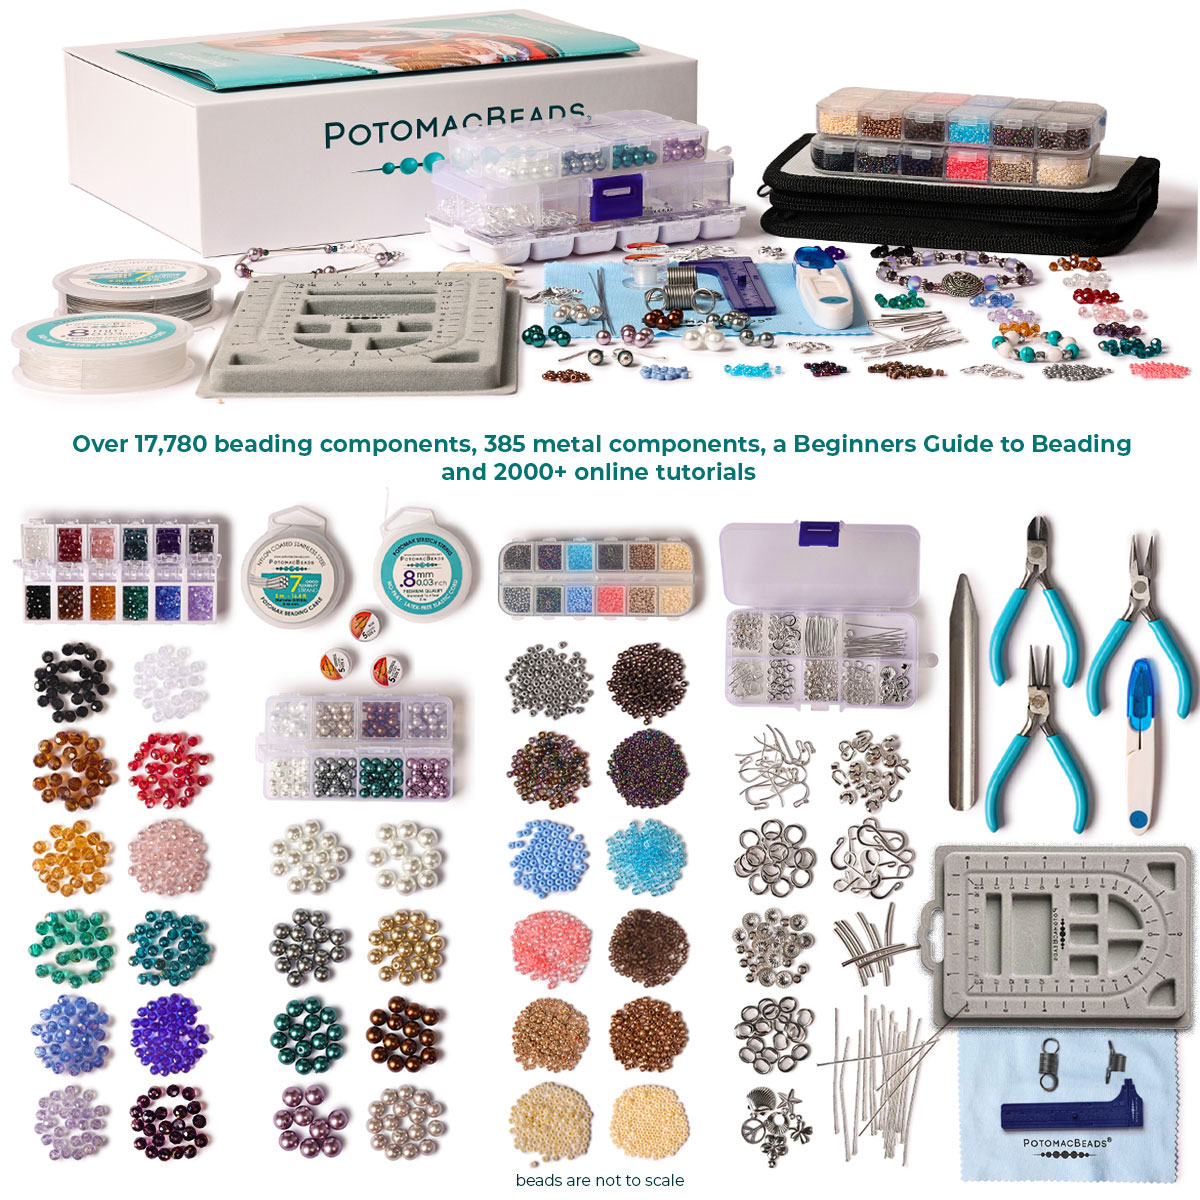 PotomacBeads' Ultimate DIY Jewelry-Making Kit for Beginners